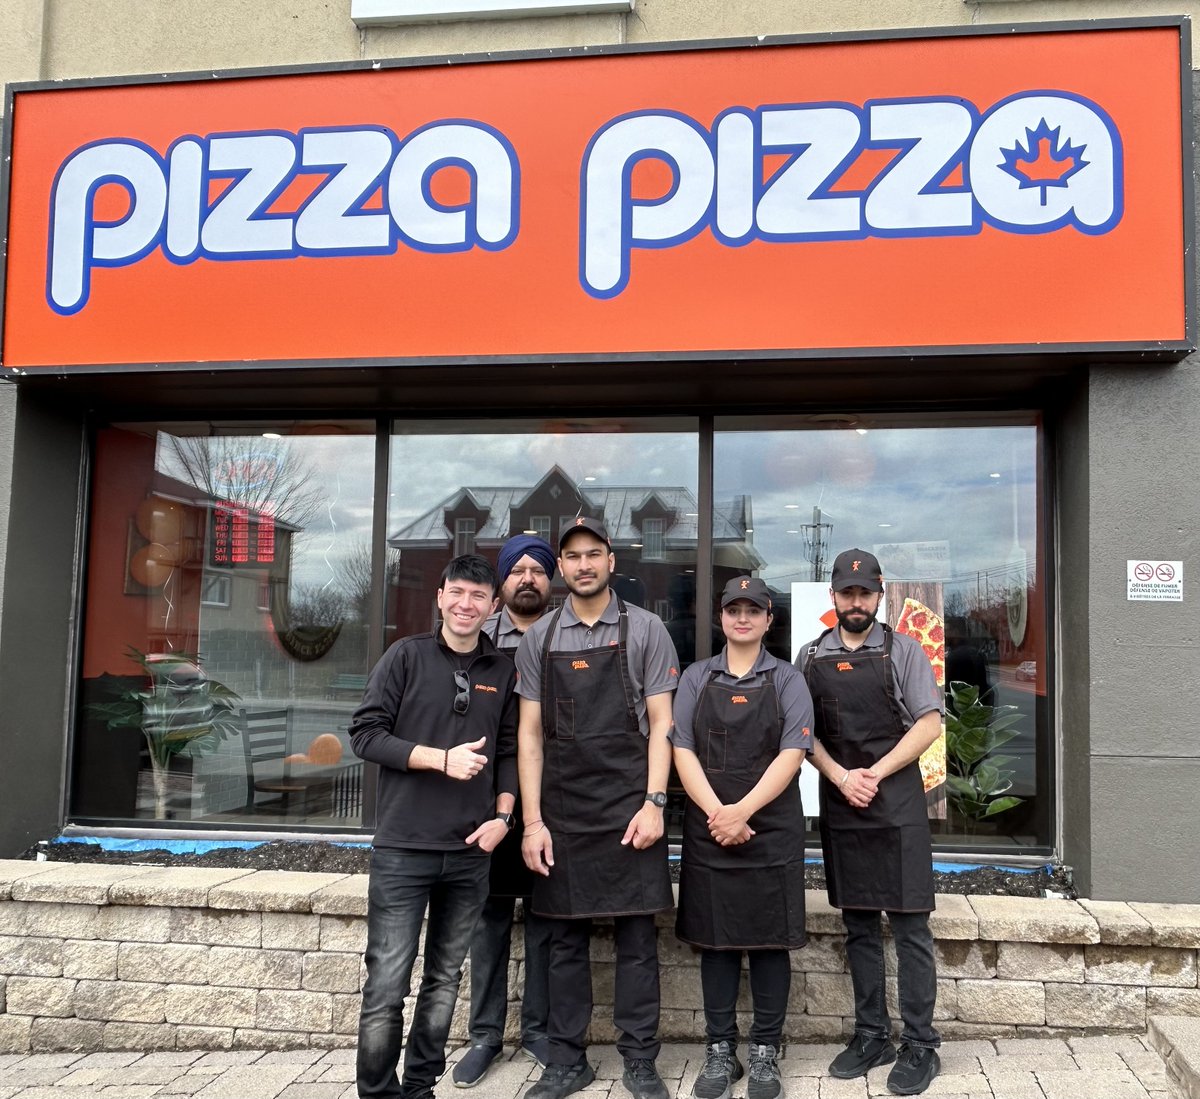 Pizza Pizza is now open in Rockland, ON 🎉 Congrautulations to our franchisee Ammy! Come on by and grab a slice - 2058 Laurier St. Rockland, ON 🍕🍕